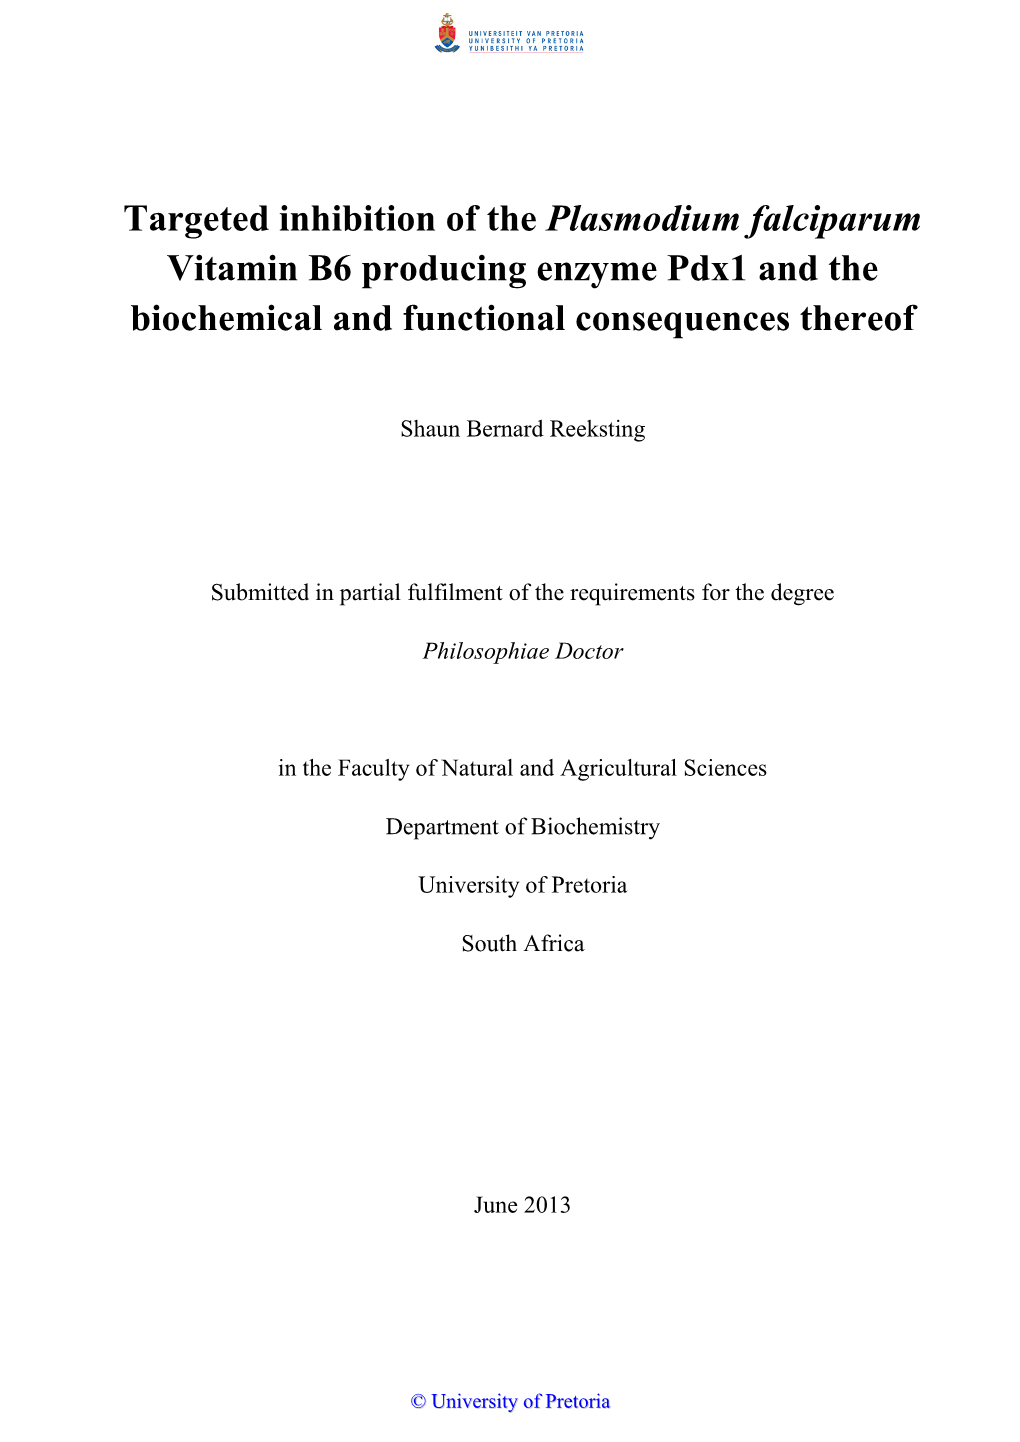 Targeted Inhibition of the Plasmodium Falciparum Vitamin B6 Producing Enzyme Pdx1 and the Biochemical and Functional Consequences Thereof